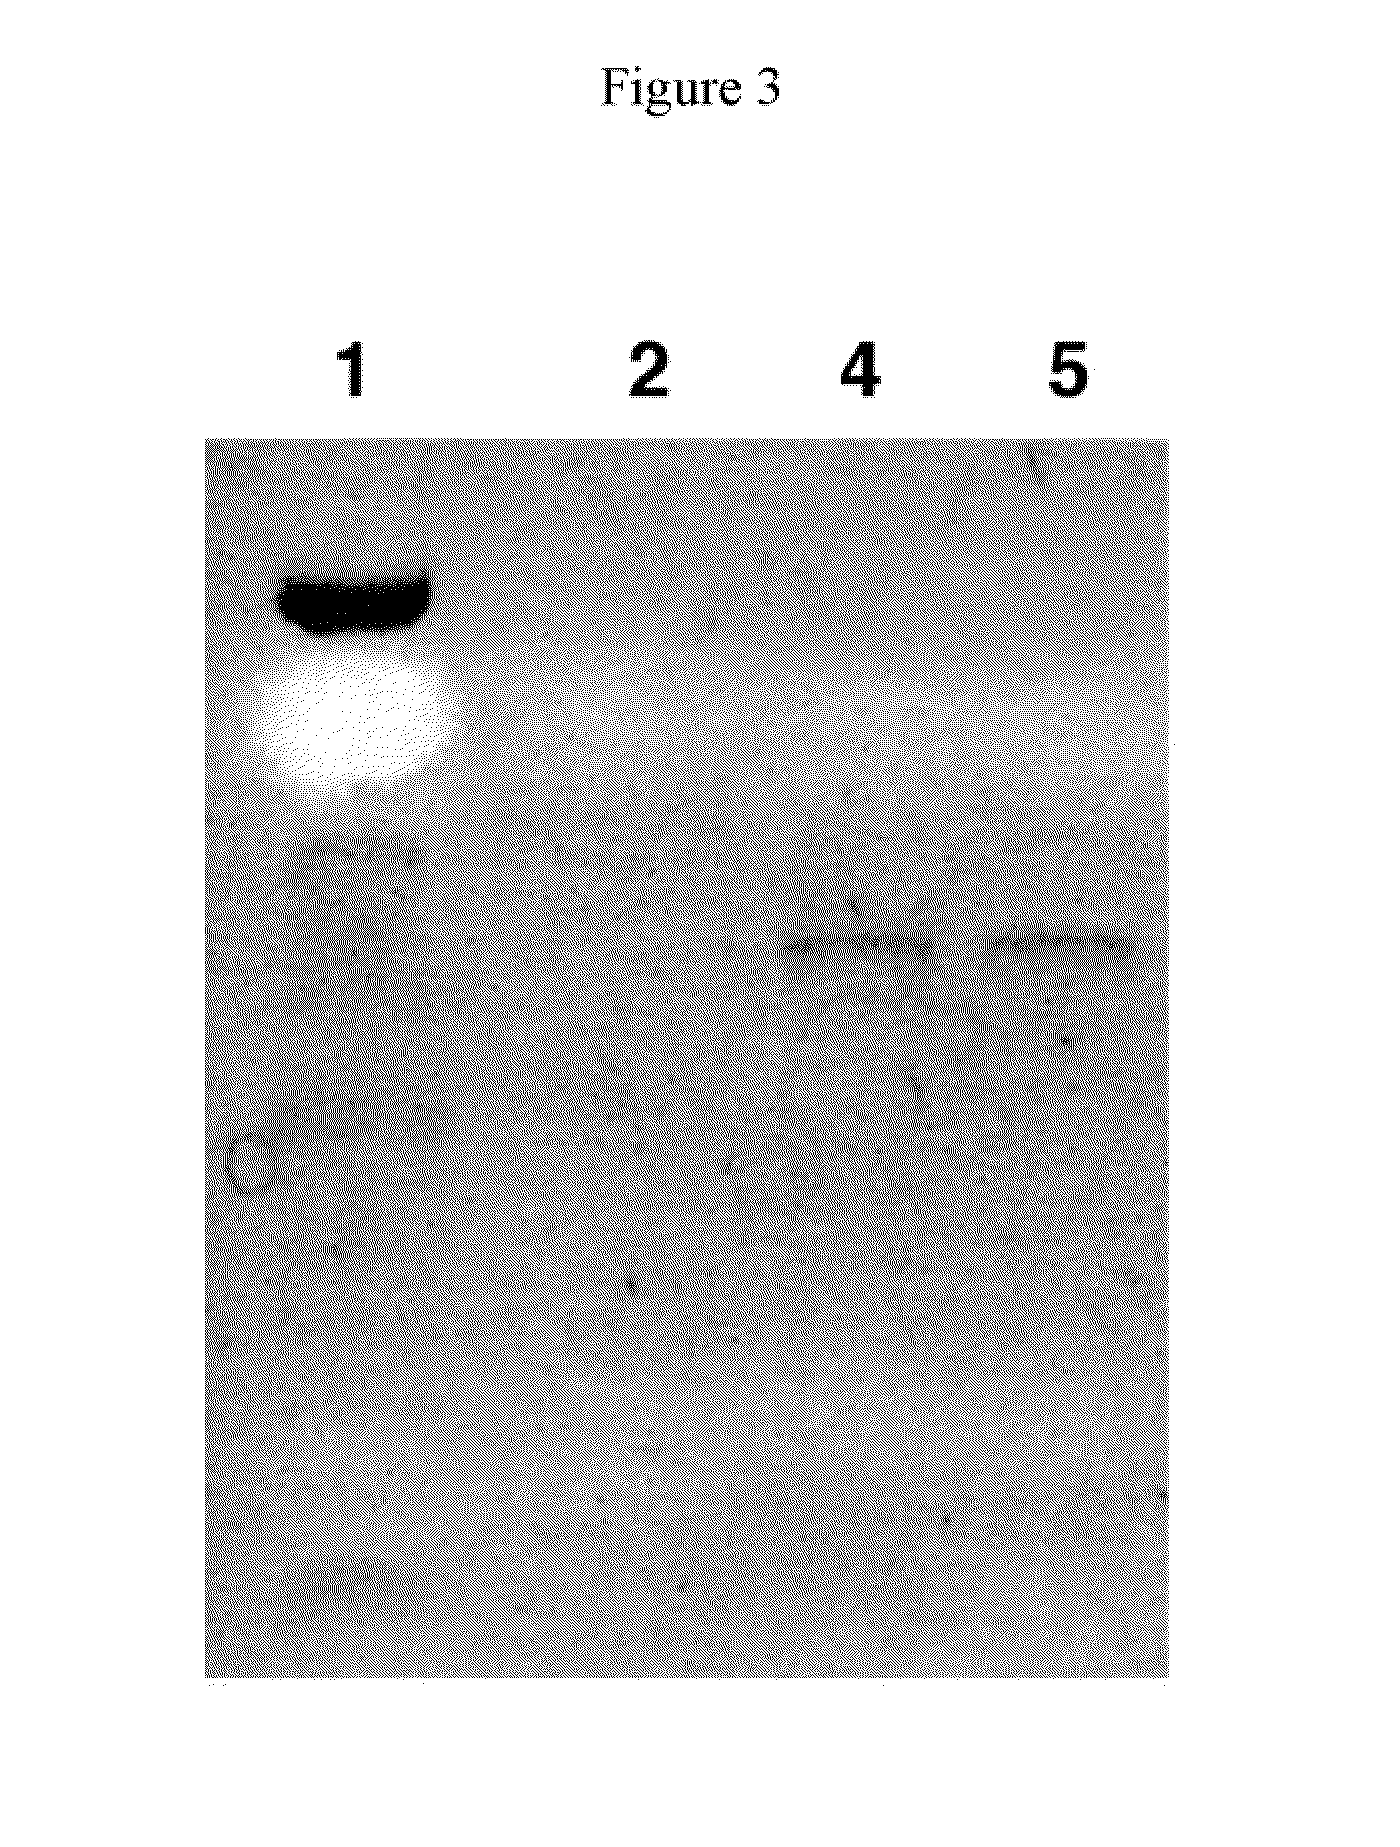 Ophthalmic Device, and Method of Use Thereof, for Increasing Ocular Boundary Lubrication